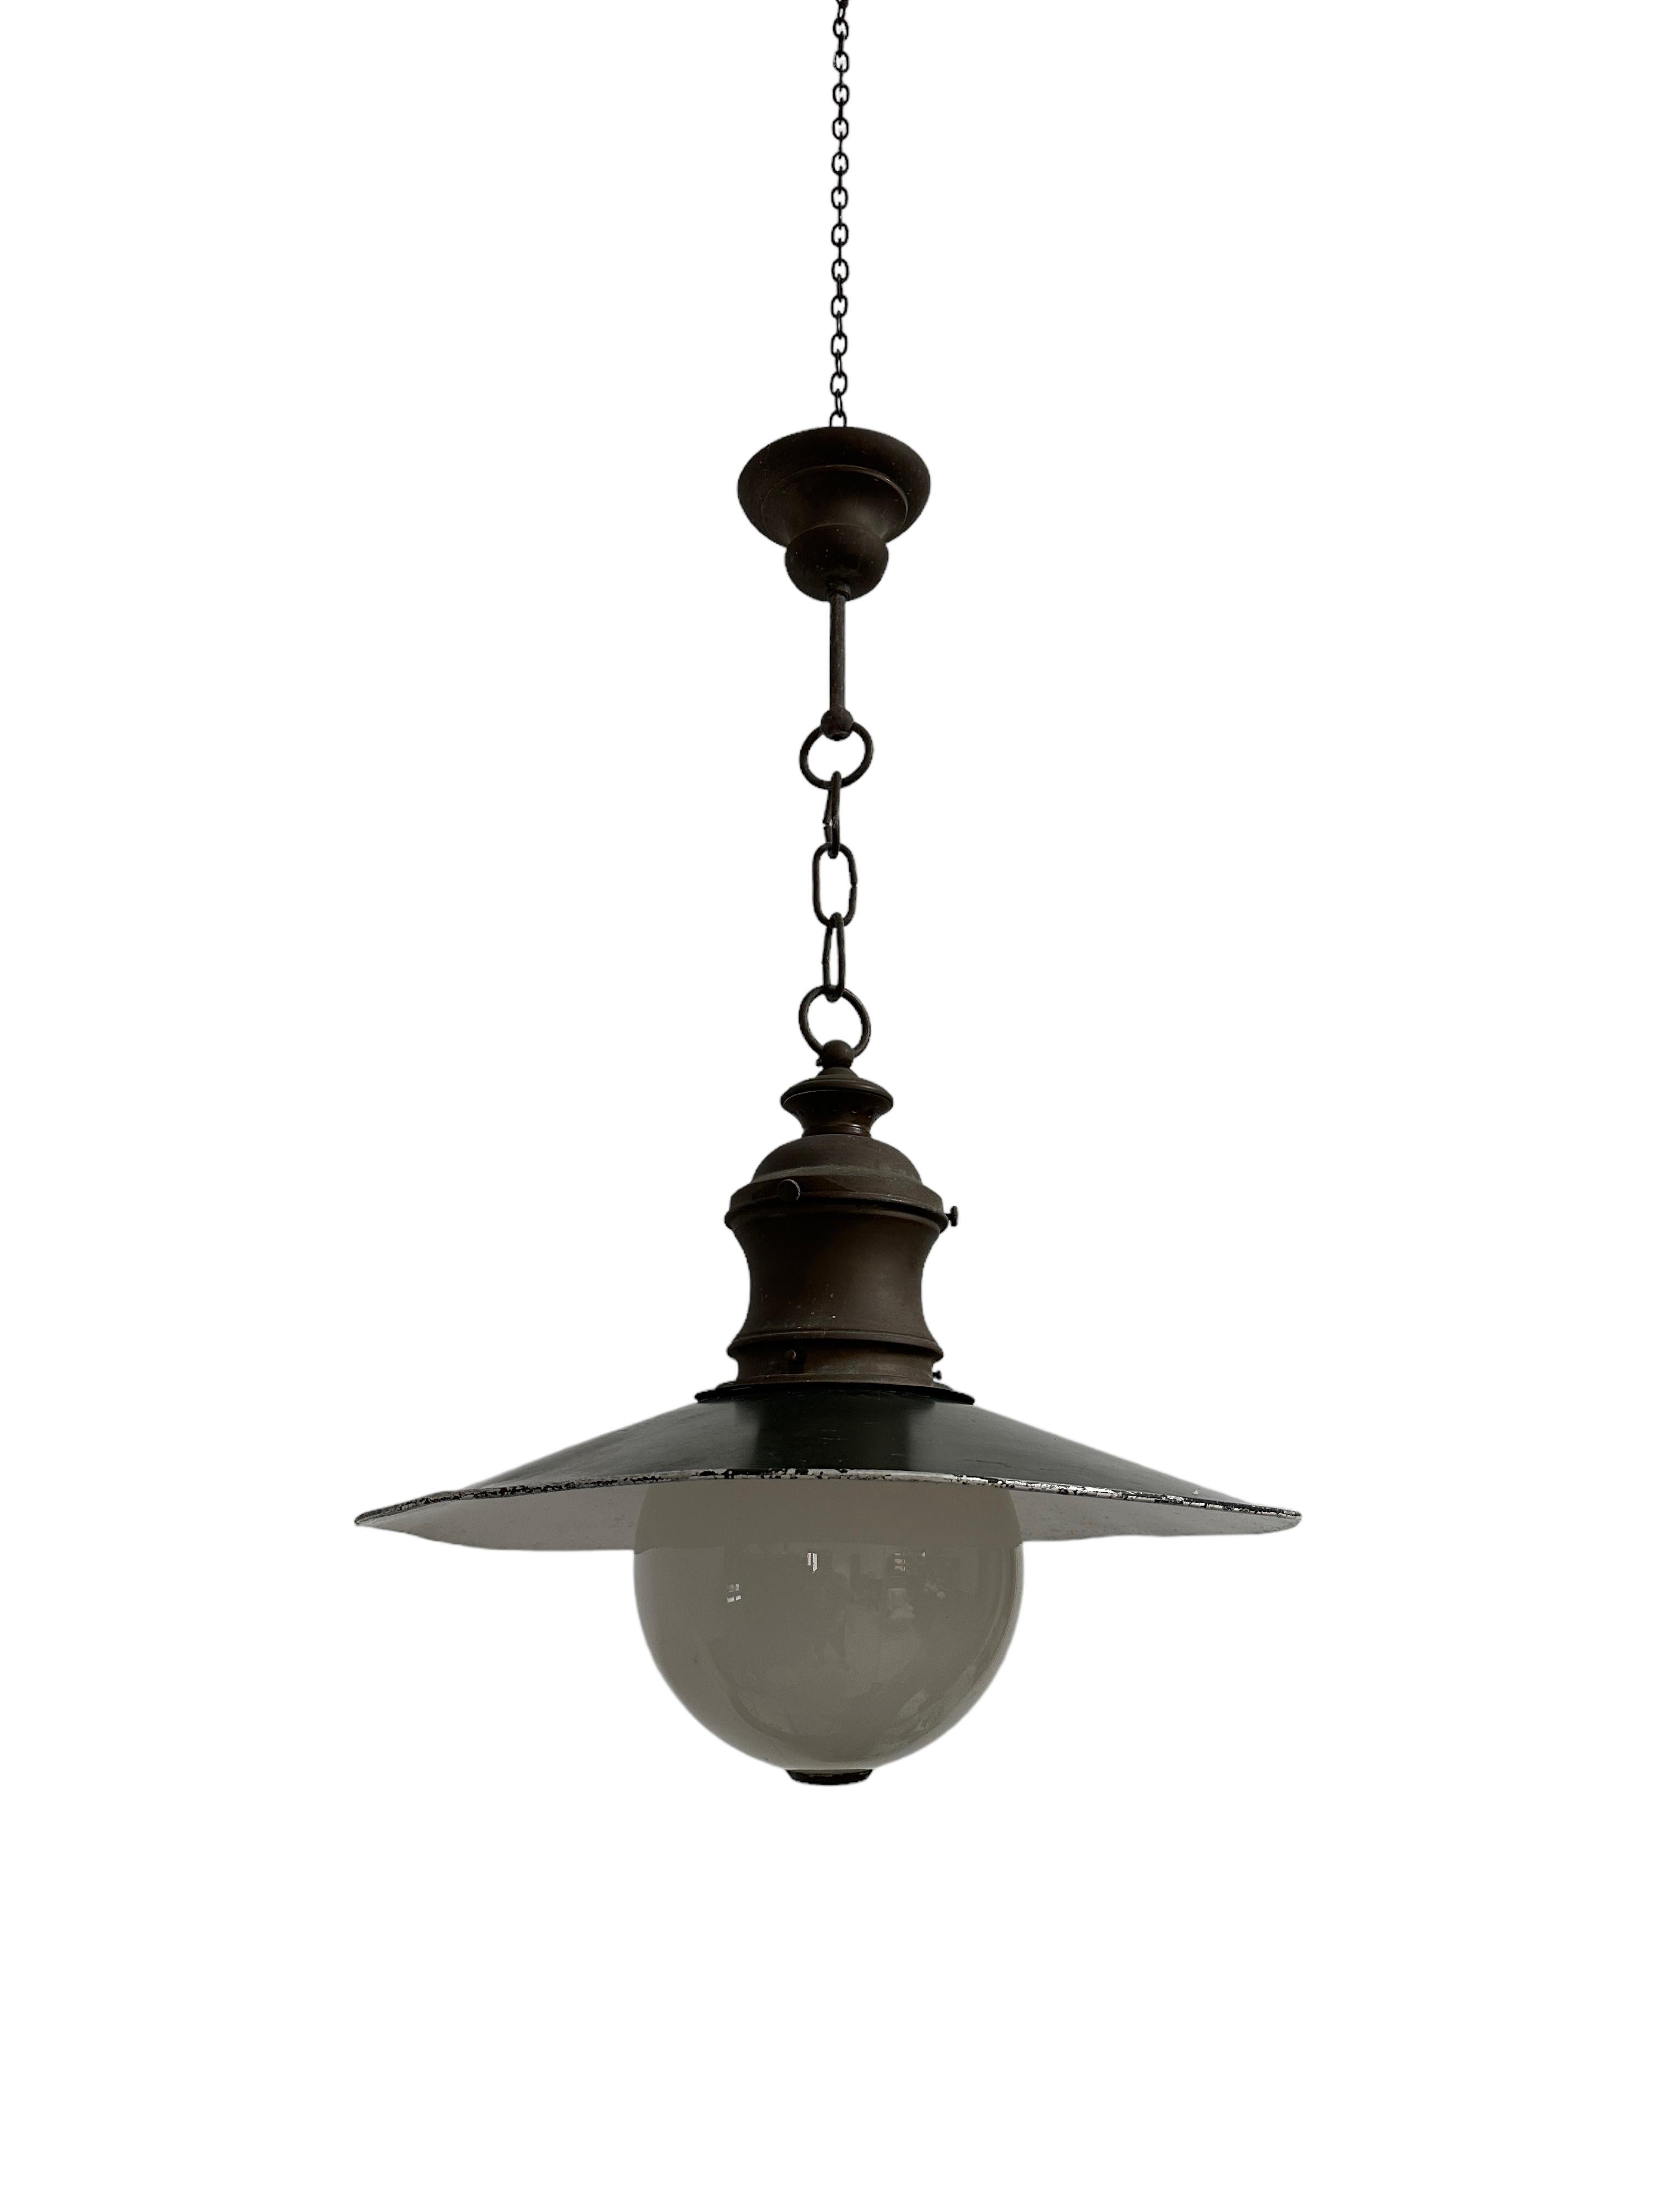 - A beautiful and rare industrial opaline ceiling pendant with copper gallery, English circa 1930.
- Most unusual opaline glass ball with finial underneath an enamel shade and with its original gallery, chain and ceiling rose.
- Wear commensurate